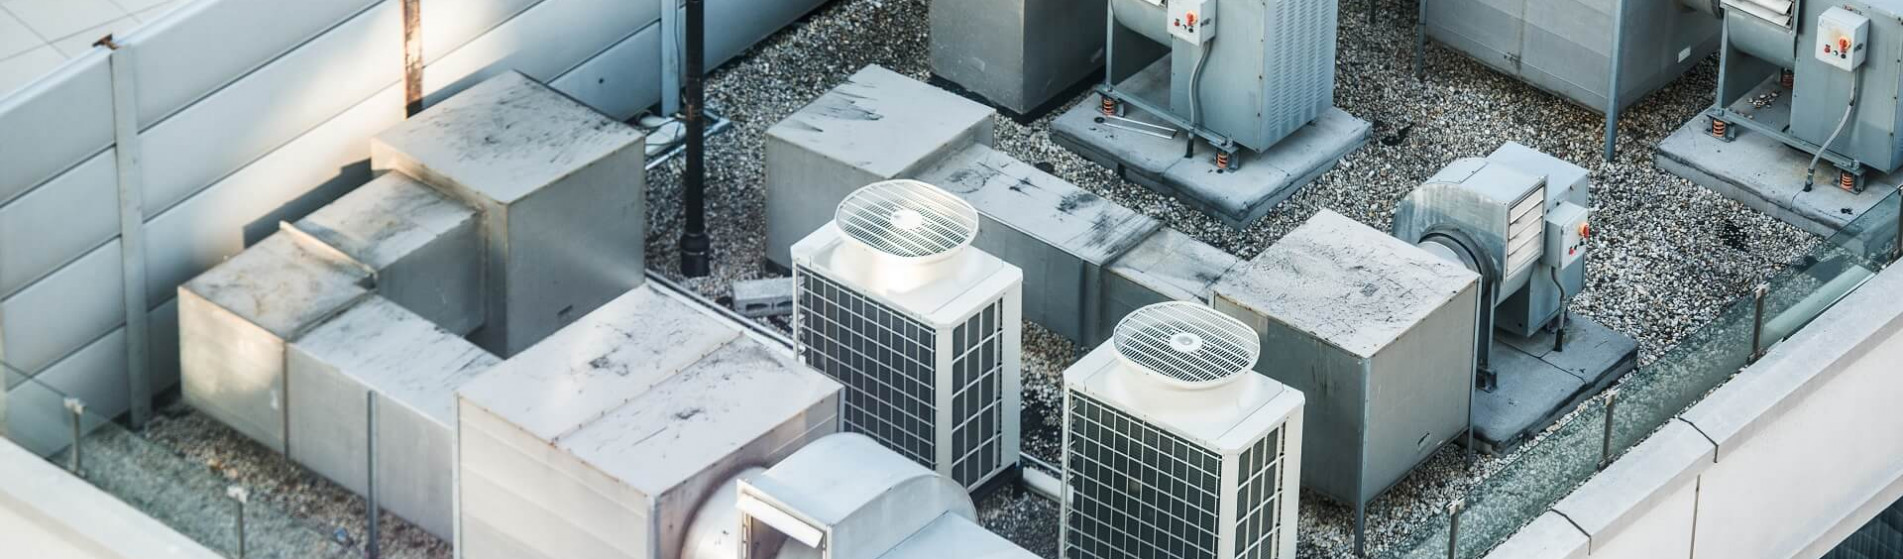 Air conditioning and refrigeration technology - highest reliability thanks to great ideas